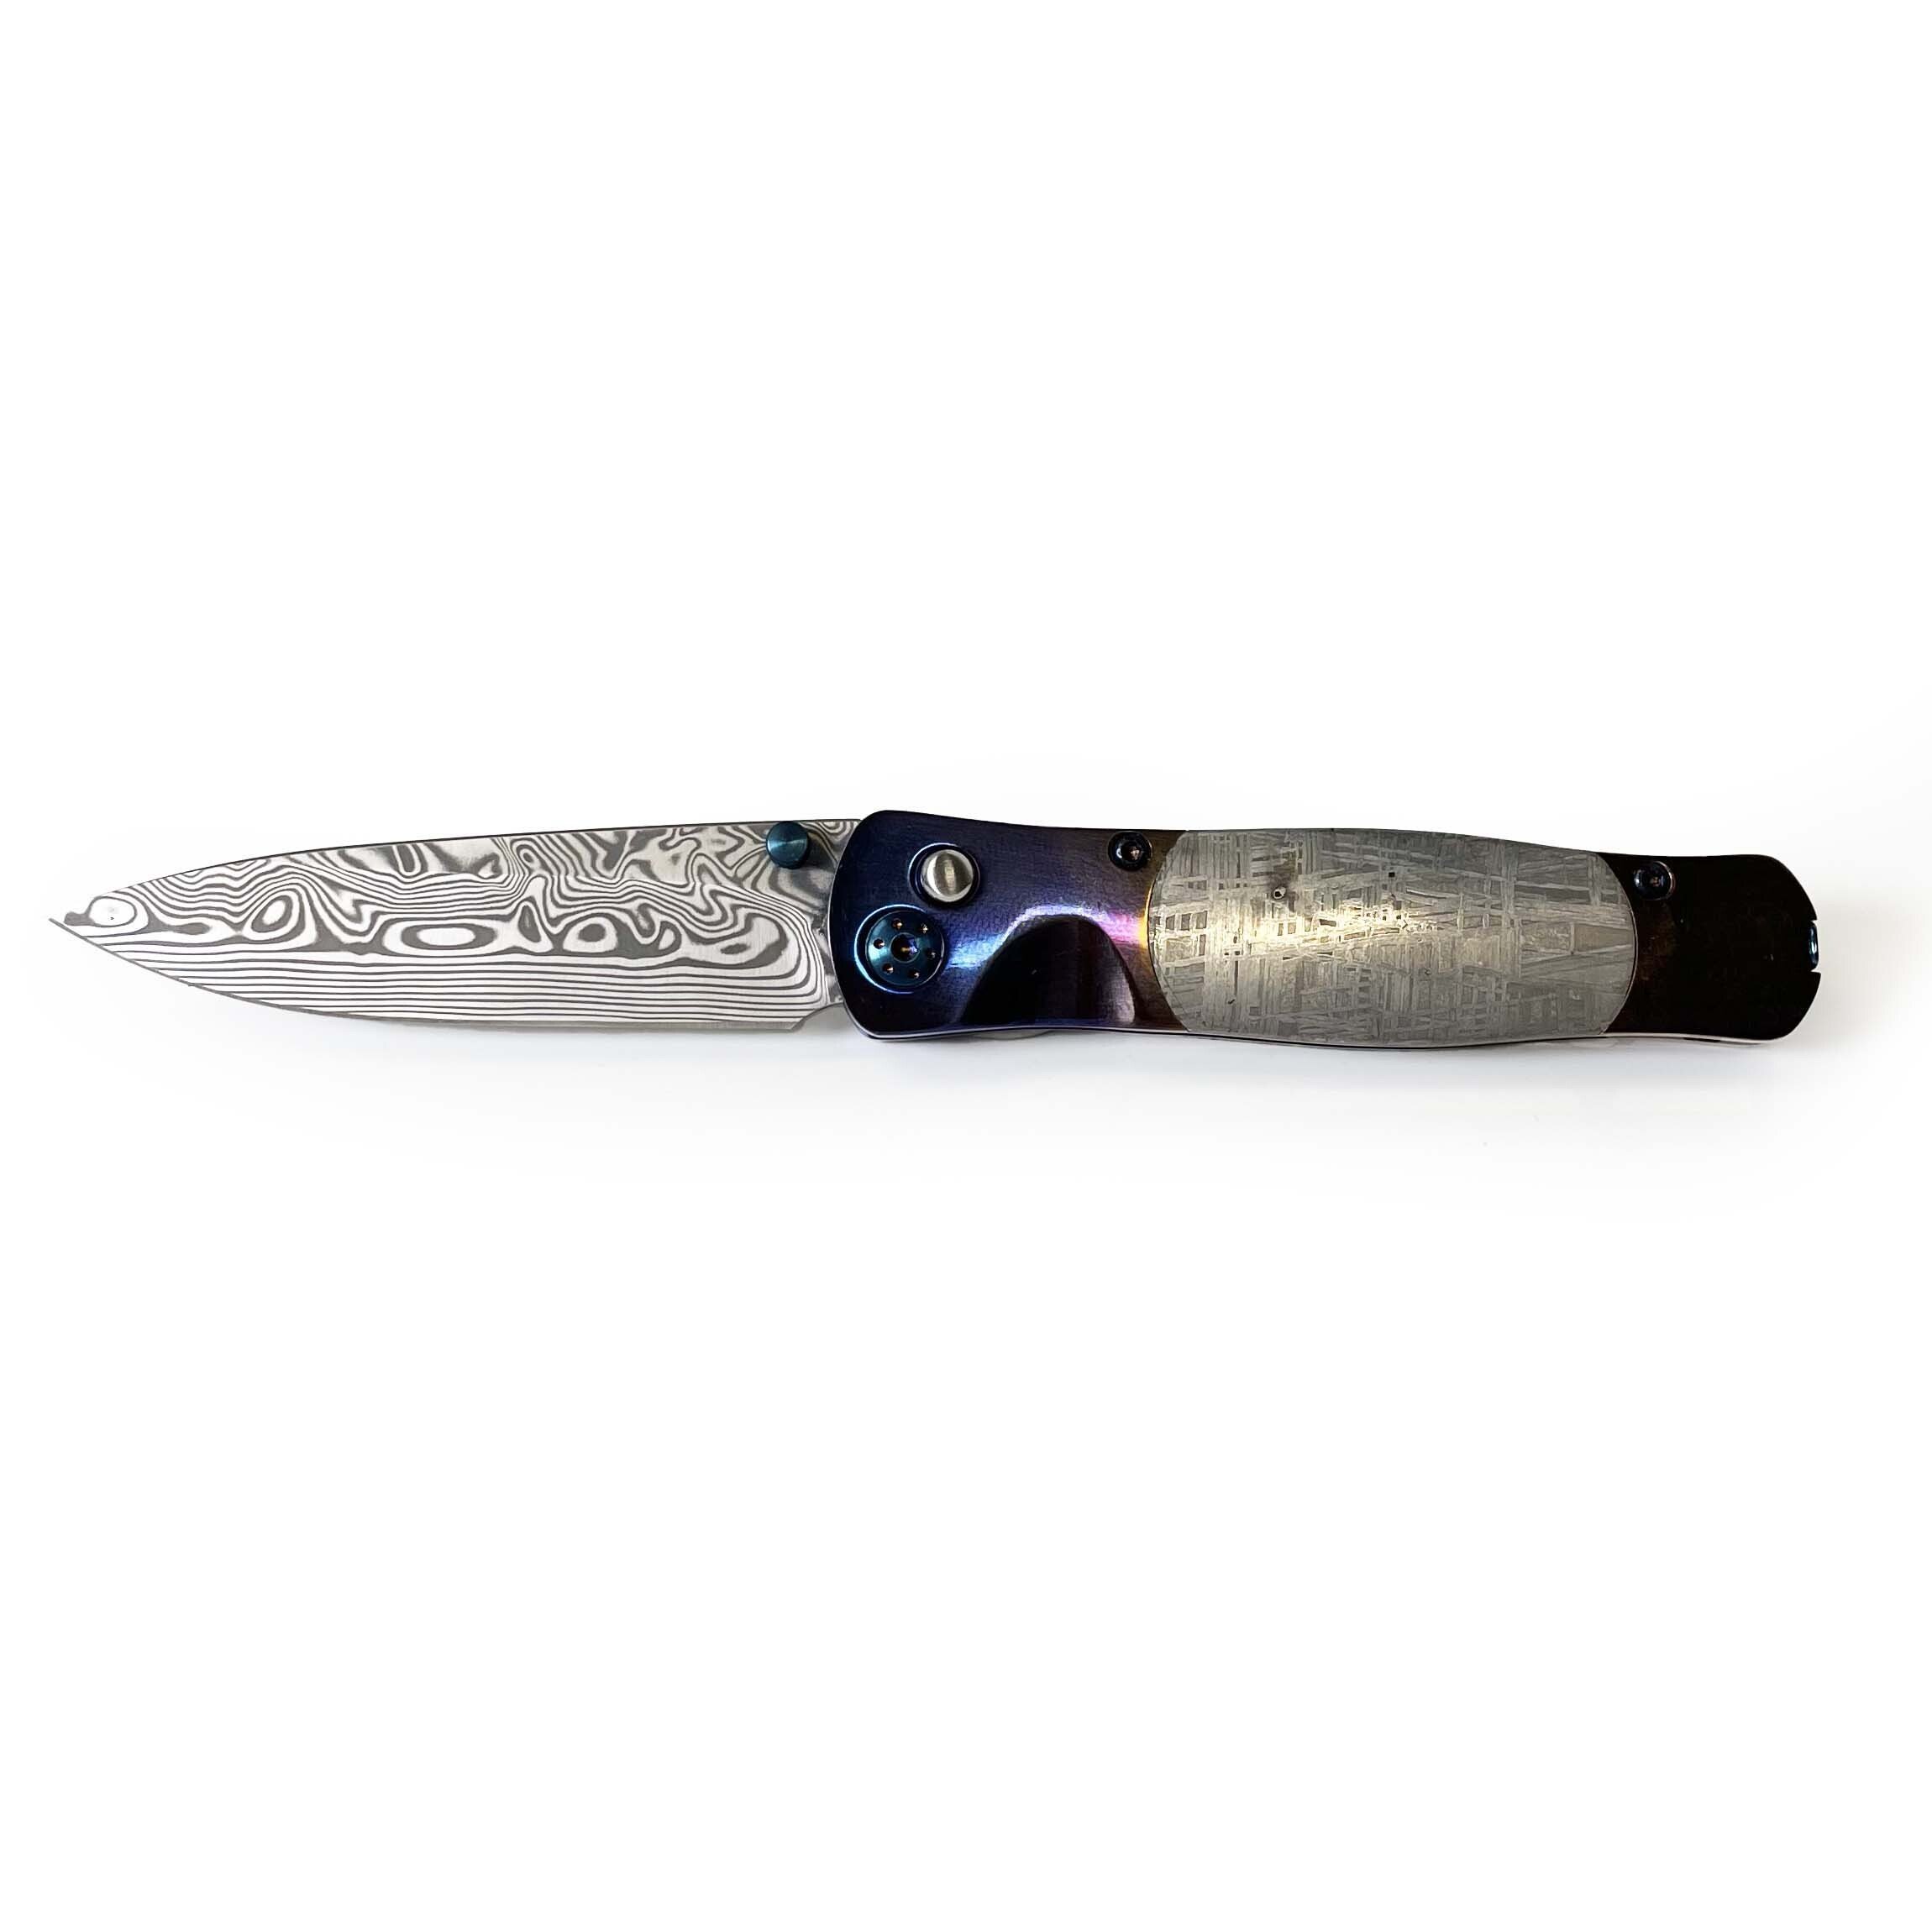 Munionalusta Meteorite Handle Knife With Damascus Steel Blade And Purple Blue & Blue Accents -Small